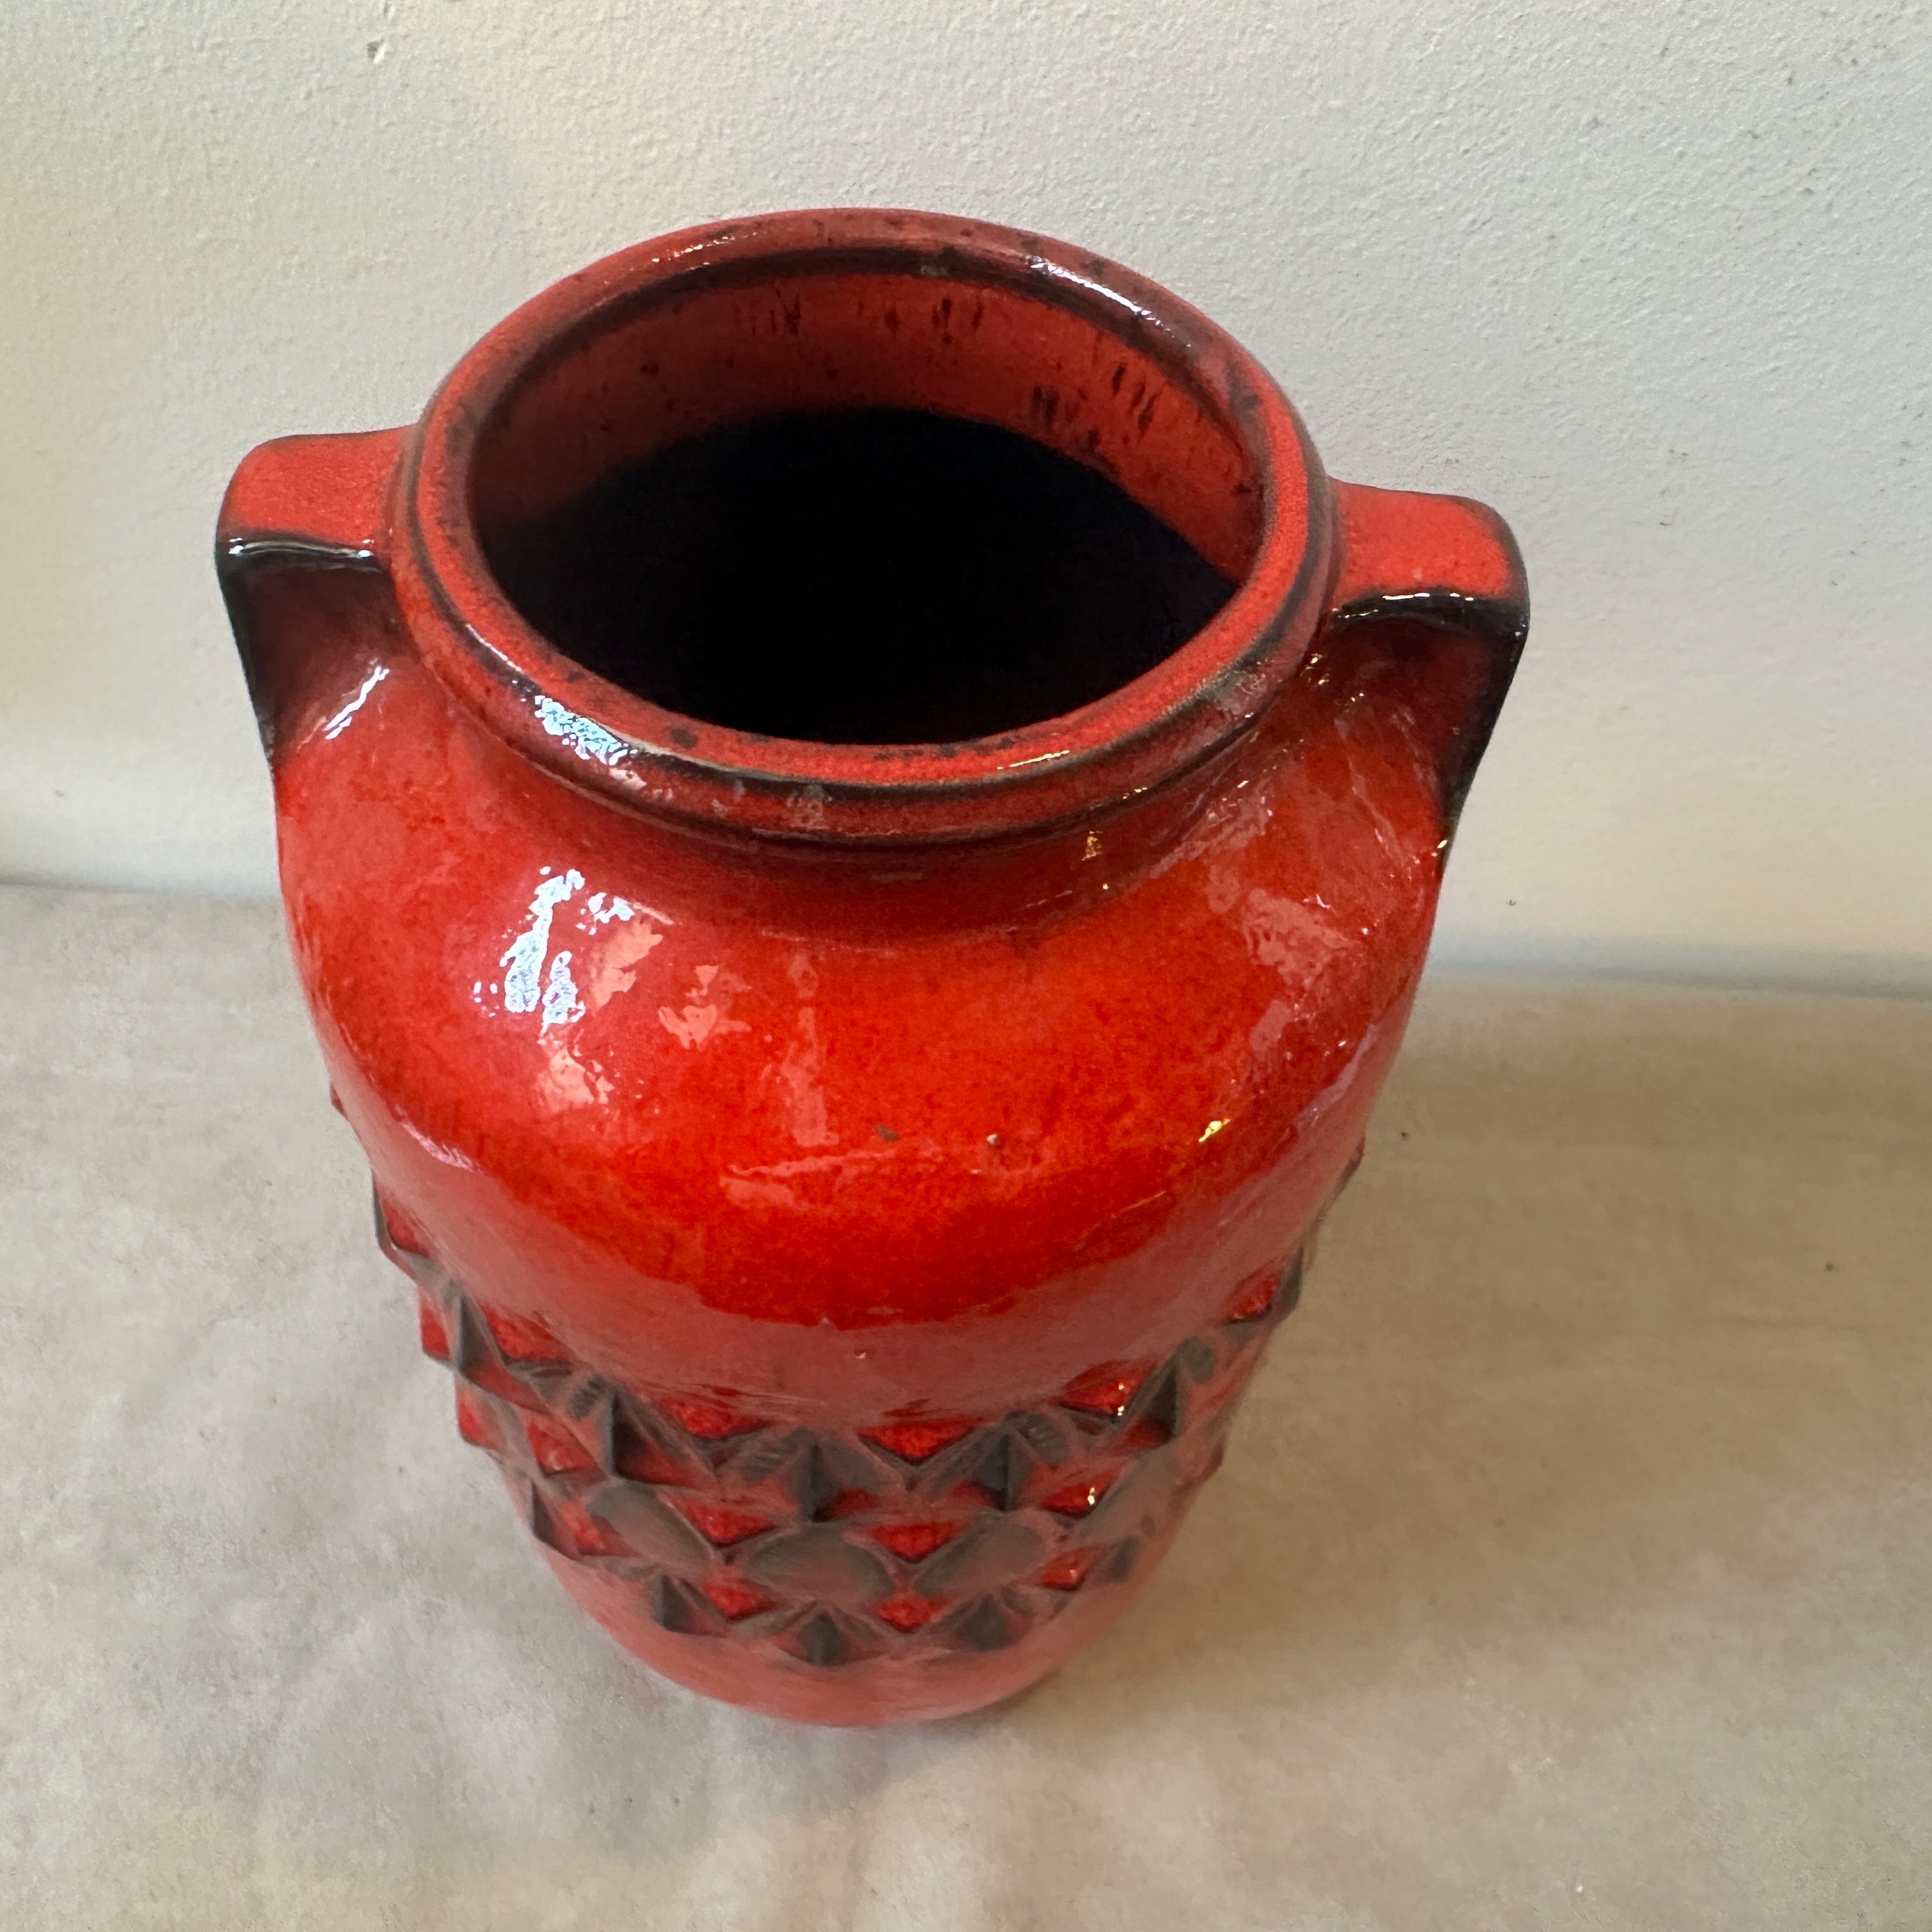 This Red and Black Ceramic German Vase is a striking example of the era's design aesthetic, characterized by its bold colors, textured surfaces, and sculptural forms. It serves as both a functional vessel and a decorative object, adding a touch of